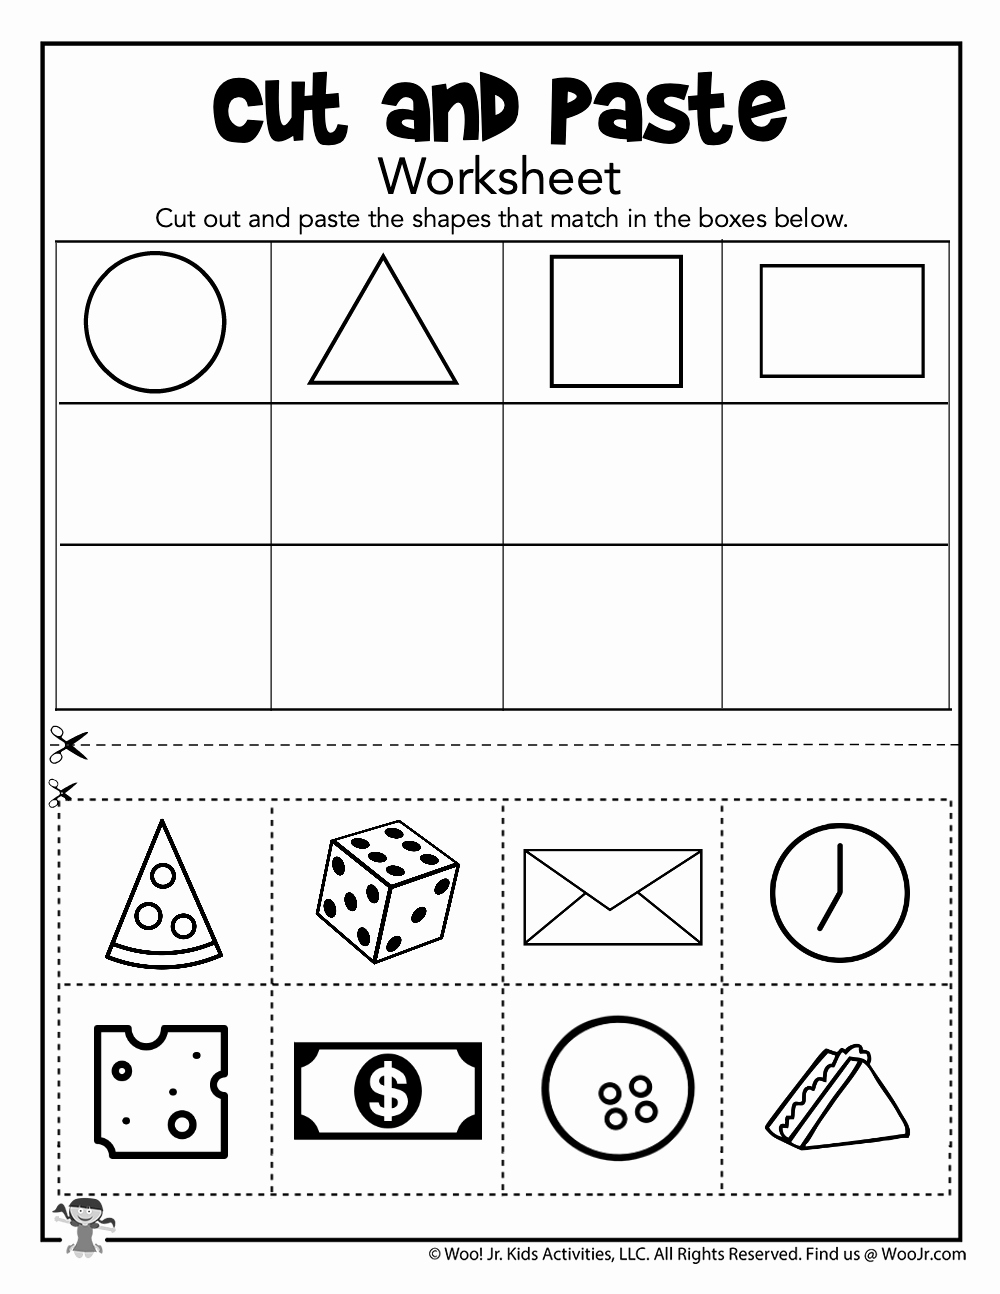 Cut and Paste Worksheets Free New Cut and Paste Shape sorting Worksheet